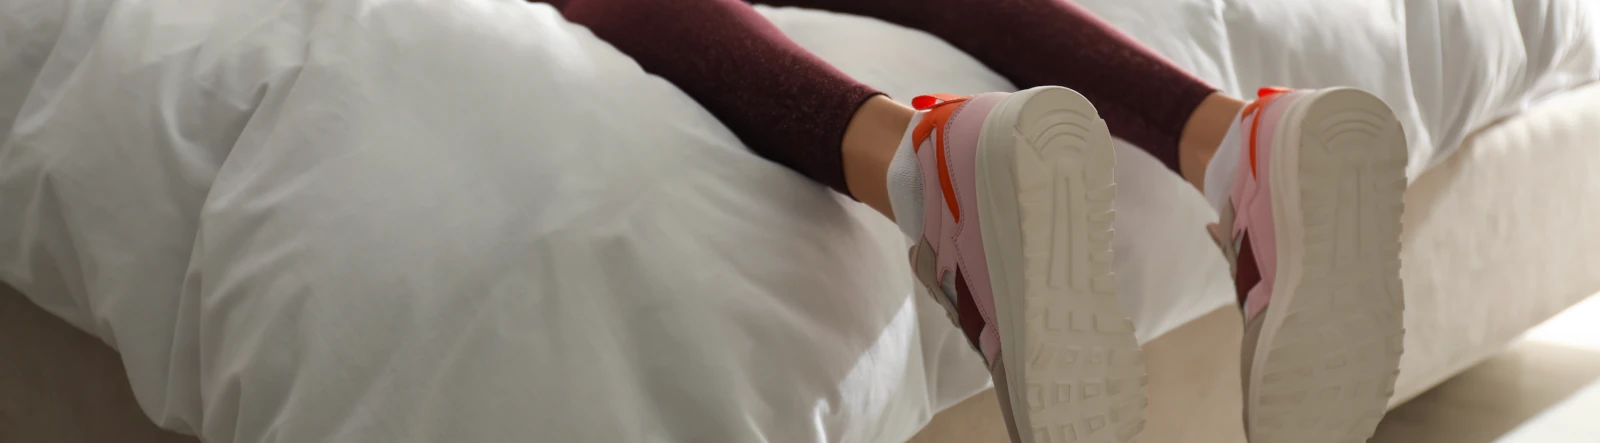 The lower legs of a woman lying on a bed wearing sneakers